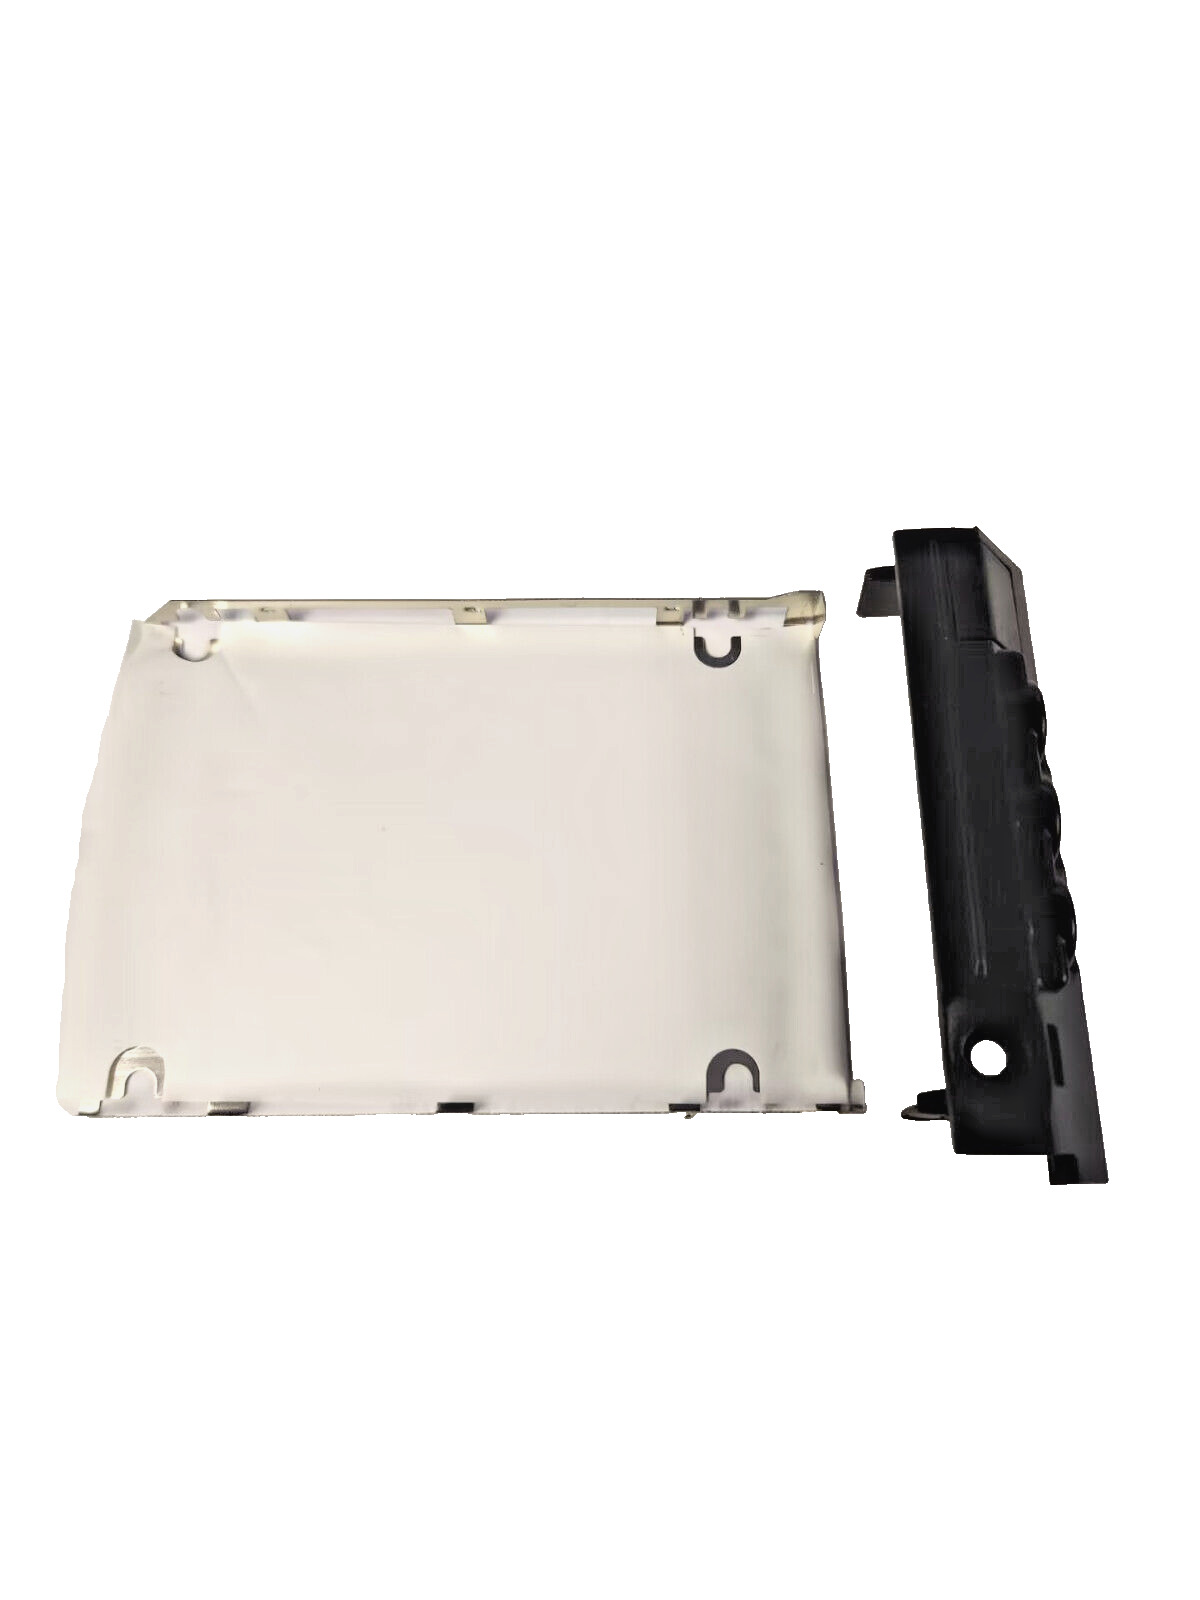 For IBM ThinkPad T20 T21 T22 T23  HD Hard Drive Caddy Tray Cover